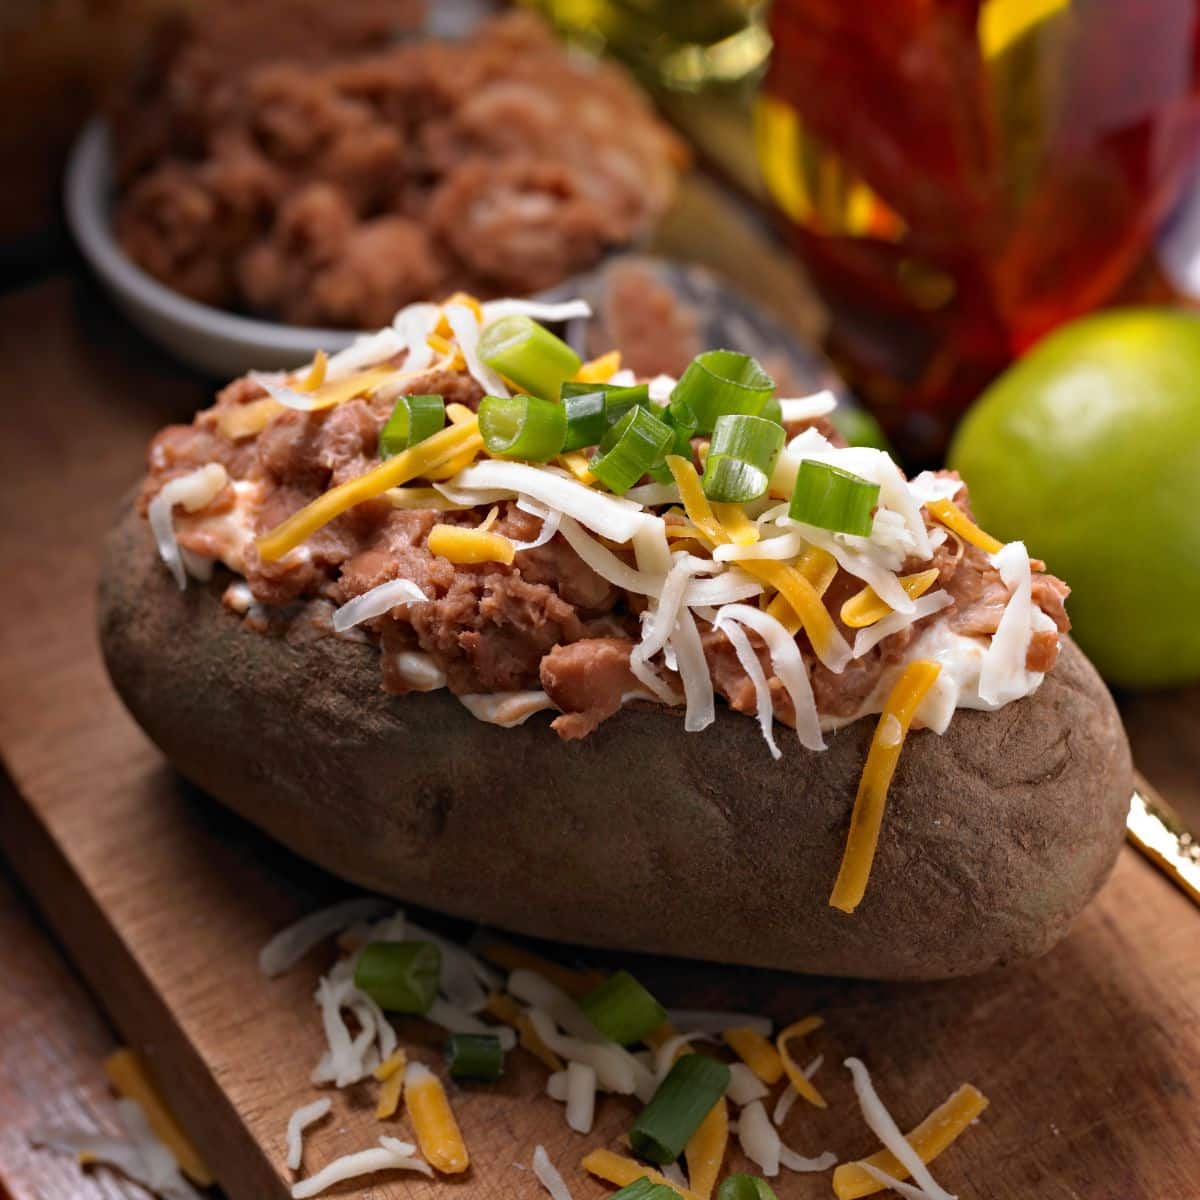 a baked potato stuffed with toppings 